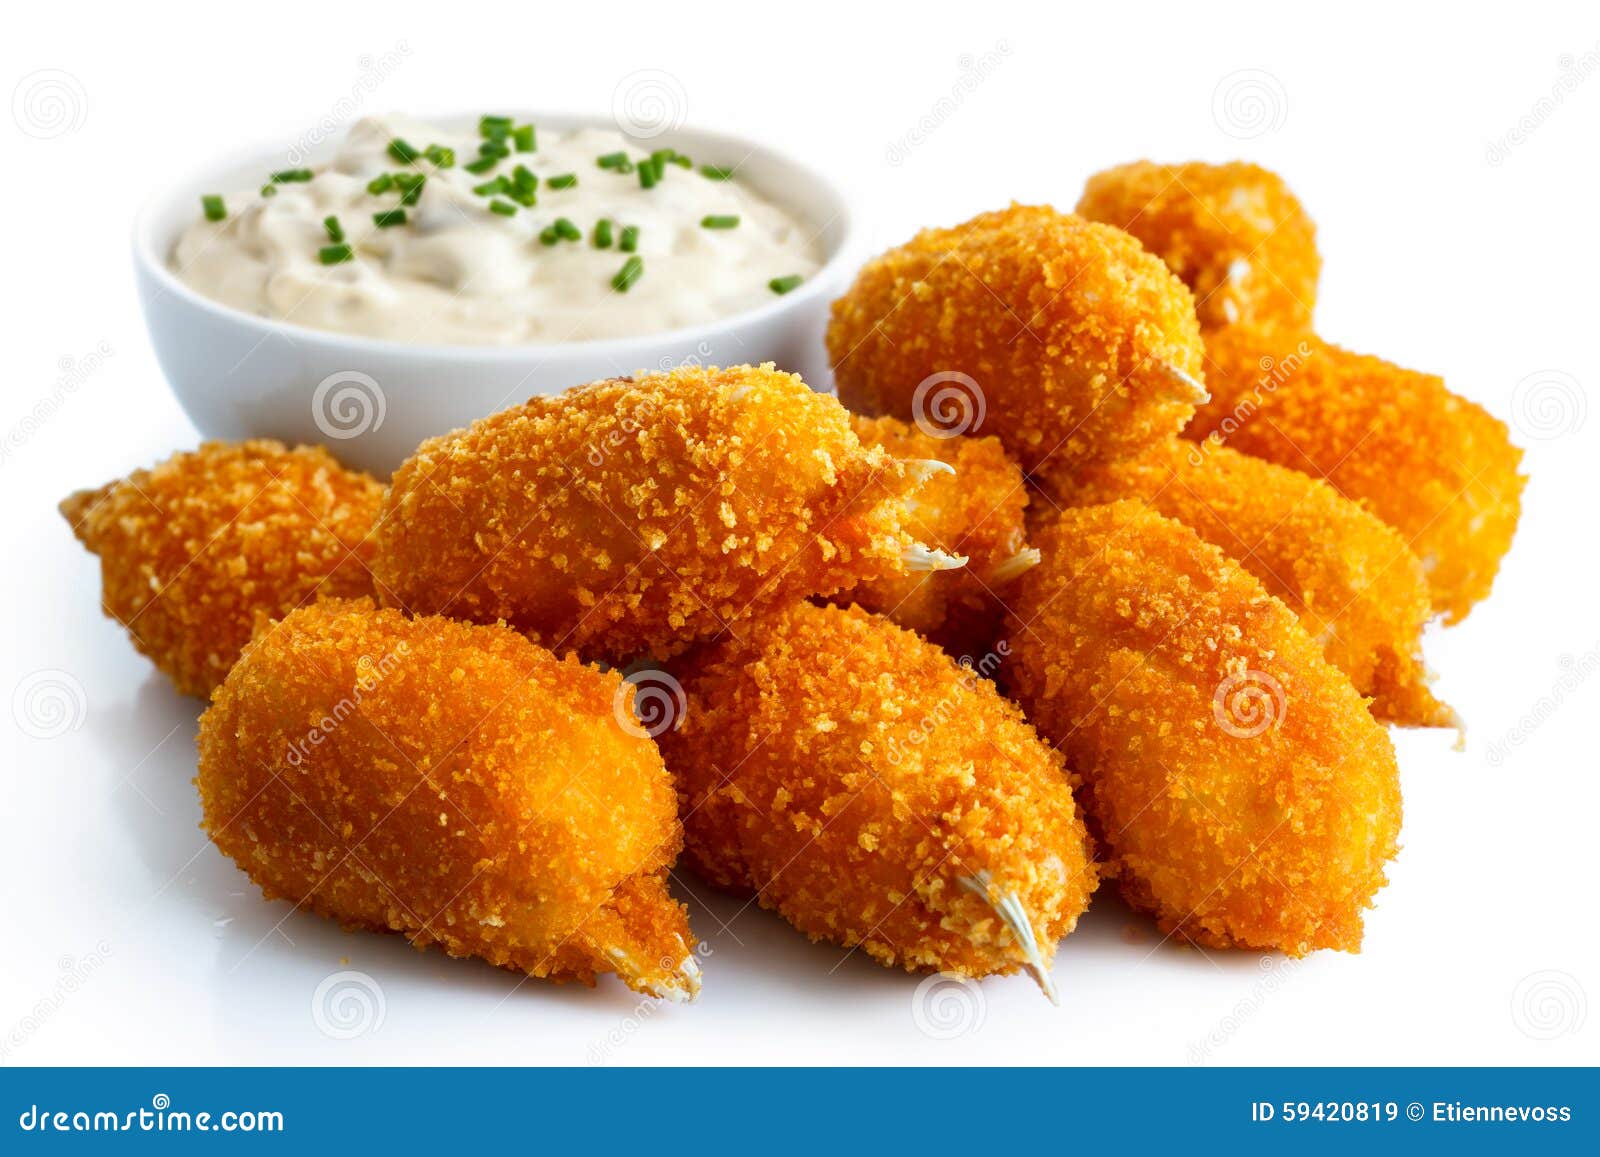 fried breaded surimi crab claws.